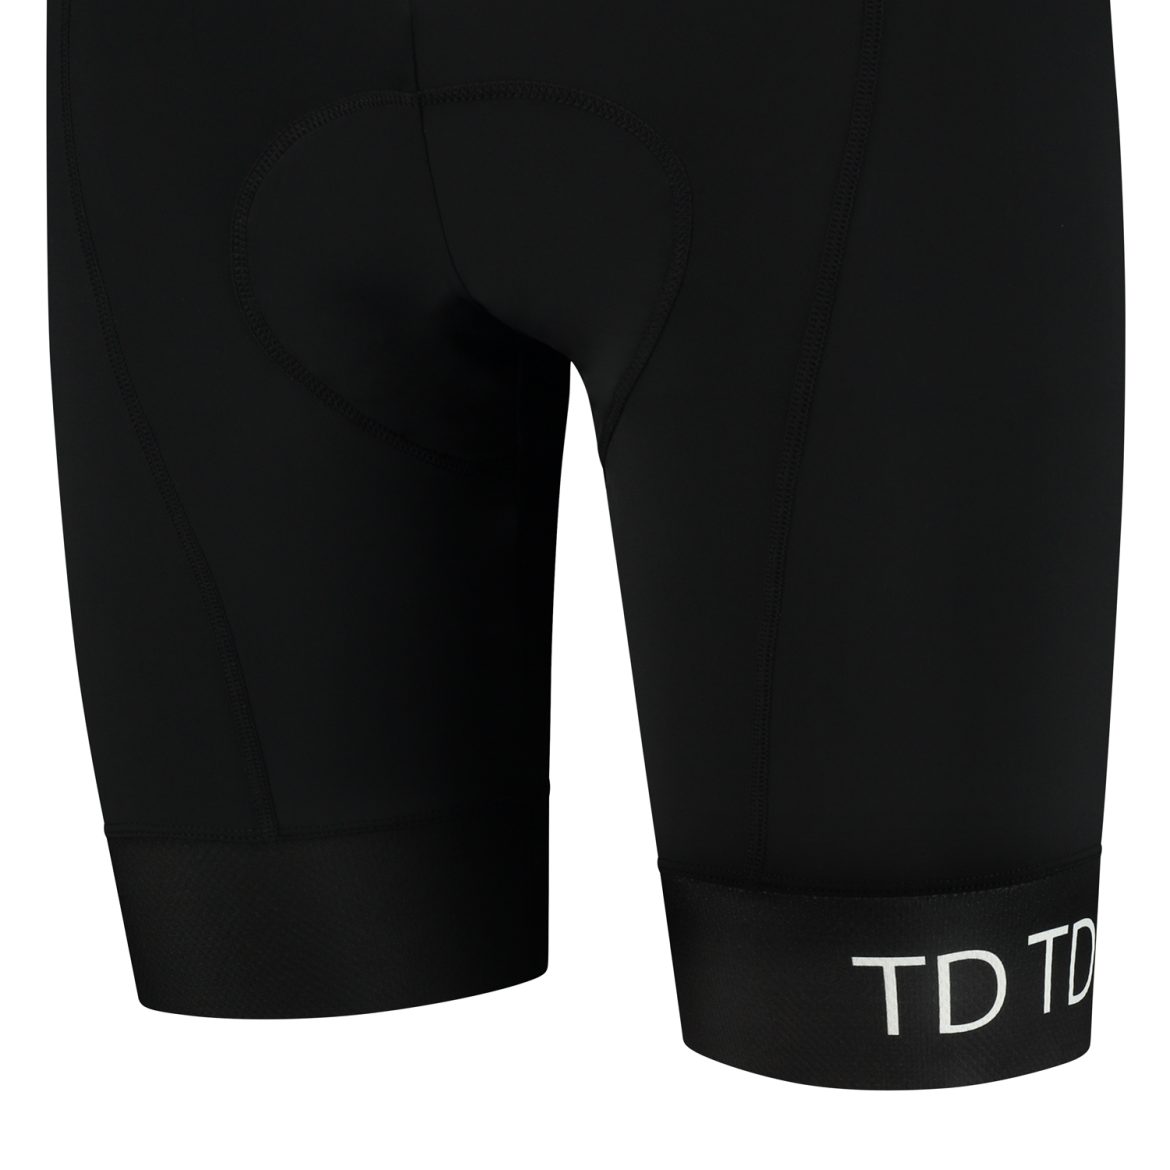 Detail photo of grippers men's short cycling shorts black color with Italian Dolomiti chamois by TD